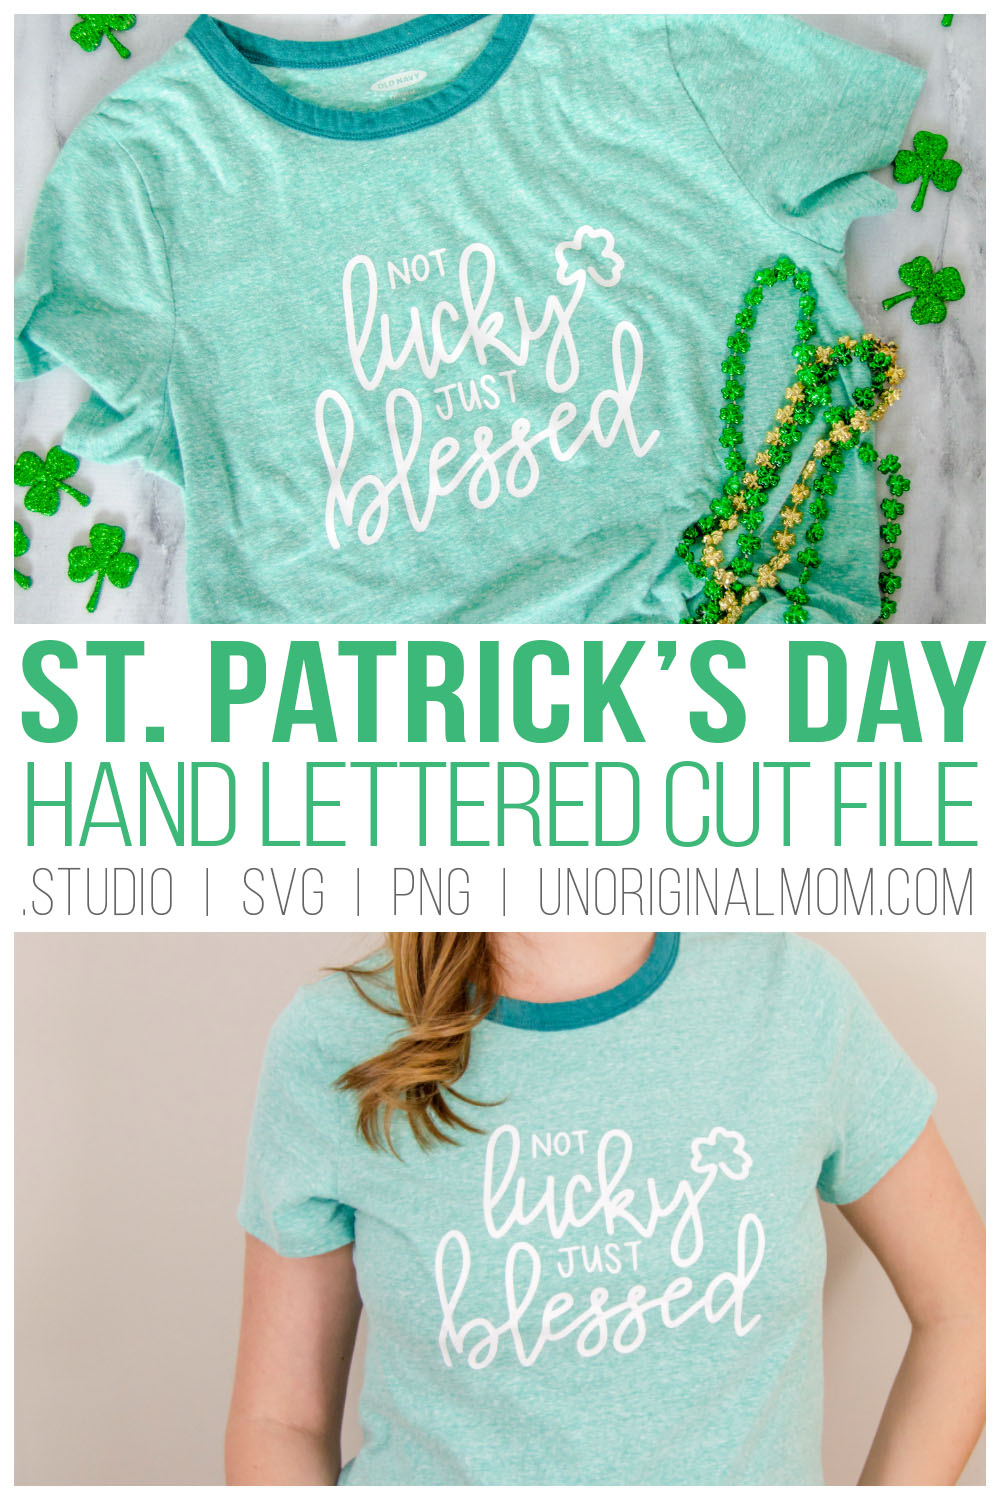 Not Lucky Just Blessed SVG - Love this St. Patrick's Day shirt with a cut file to make your own! 